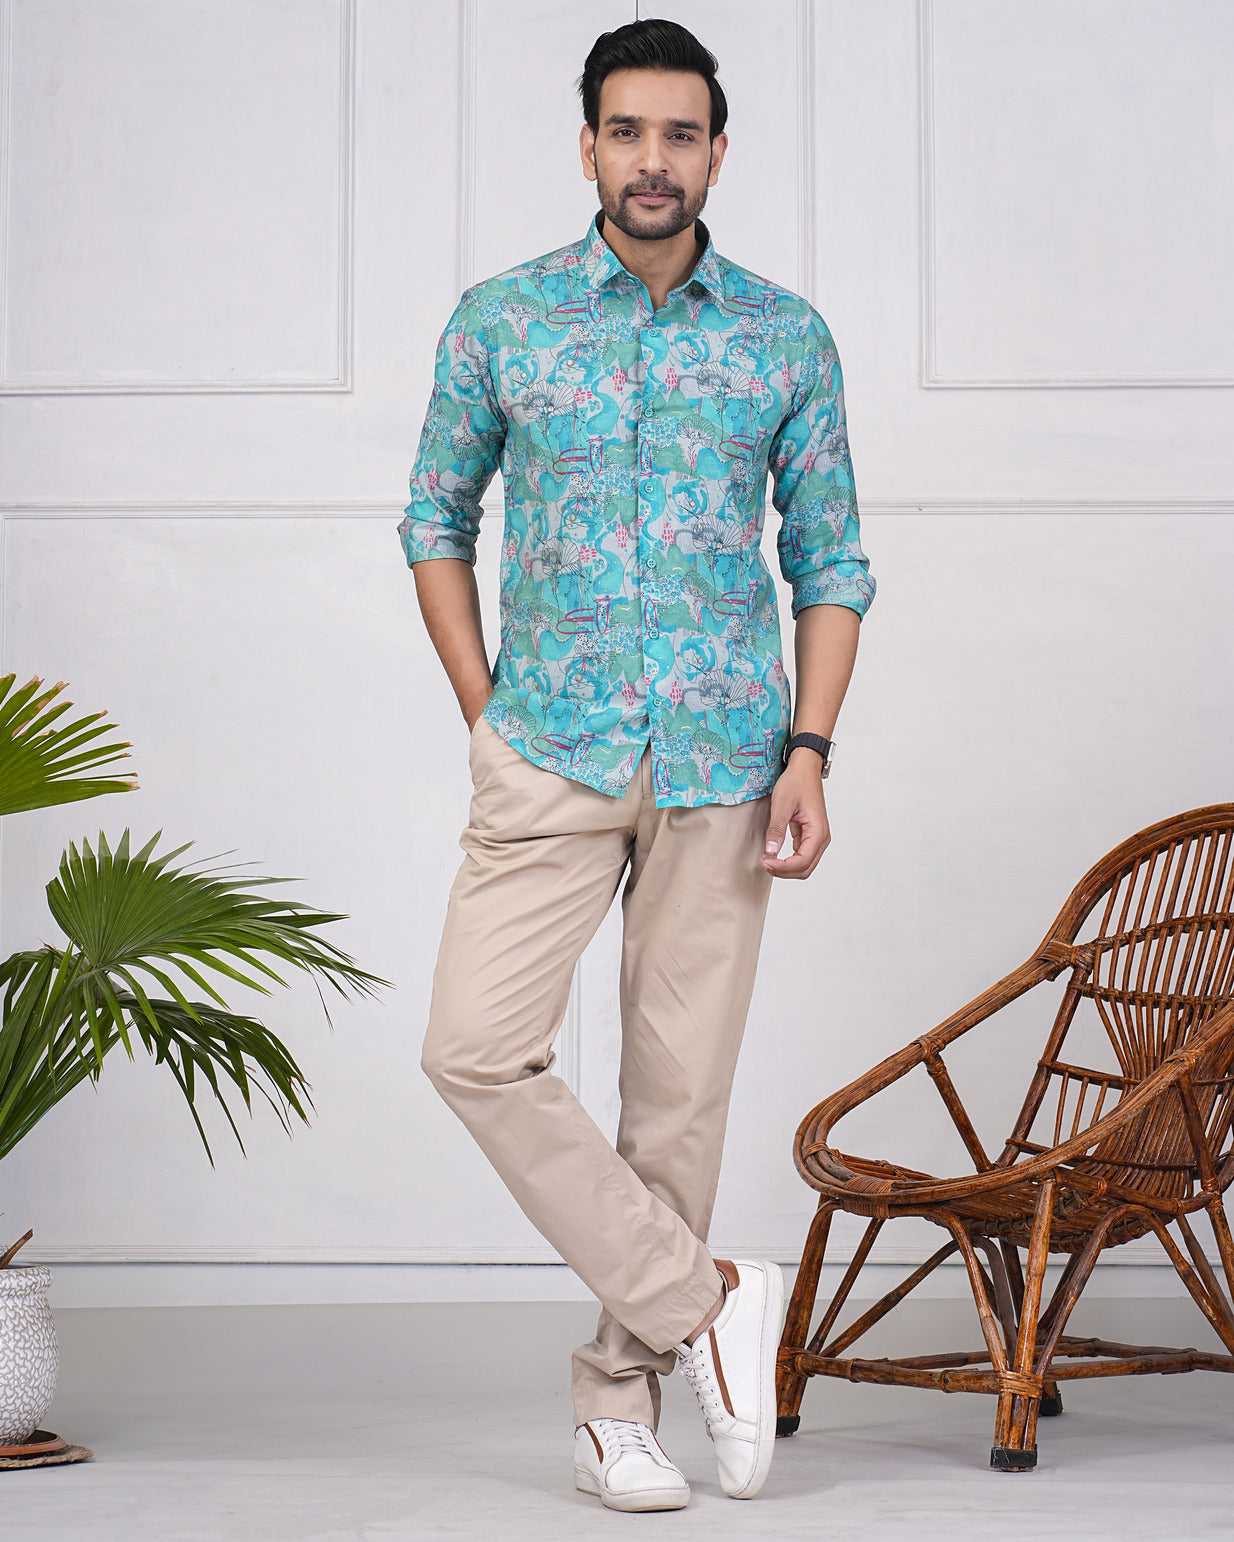 Turquoise Green With Gold Printed Floral Maslin Men's Shirt